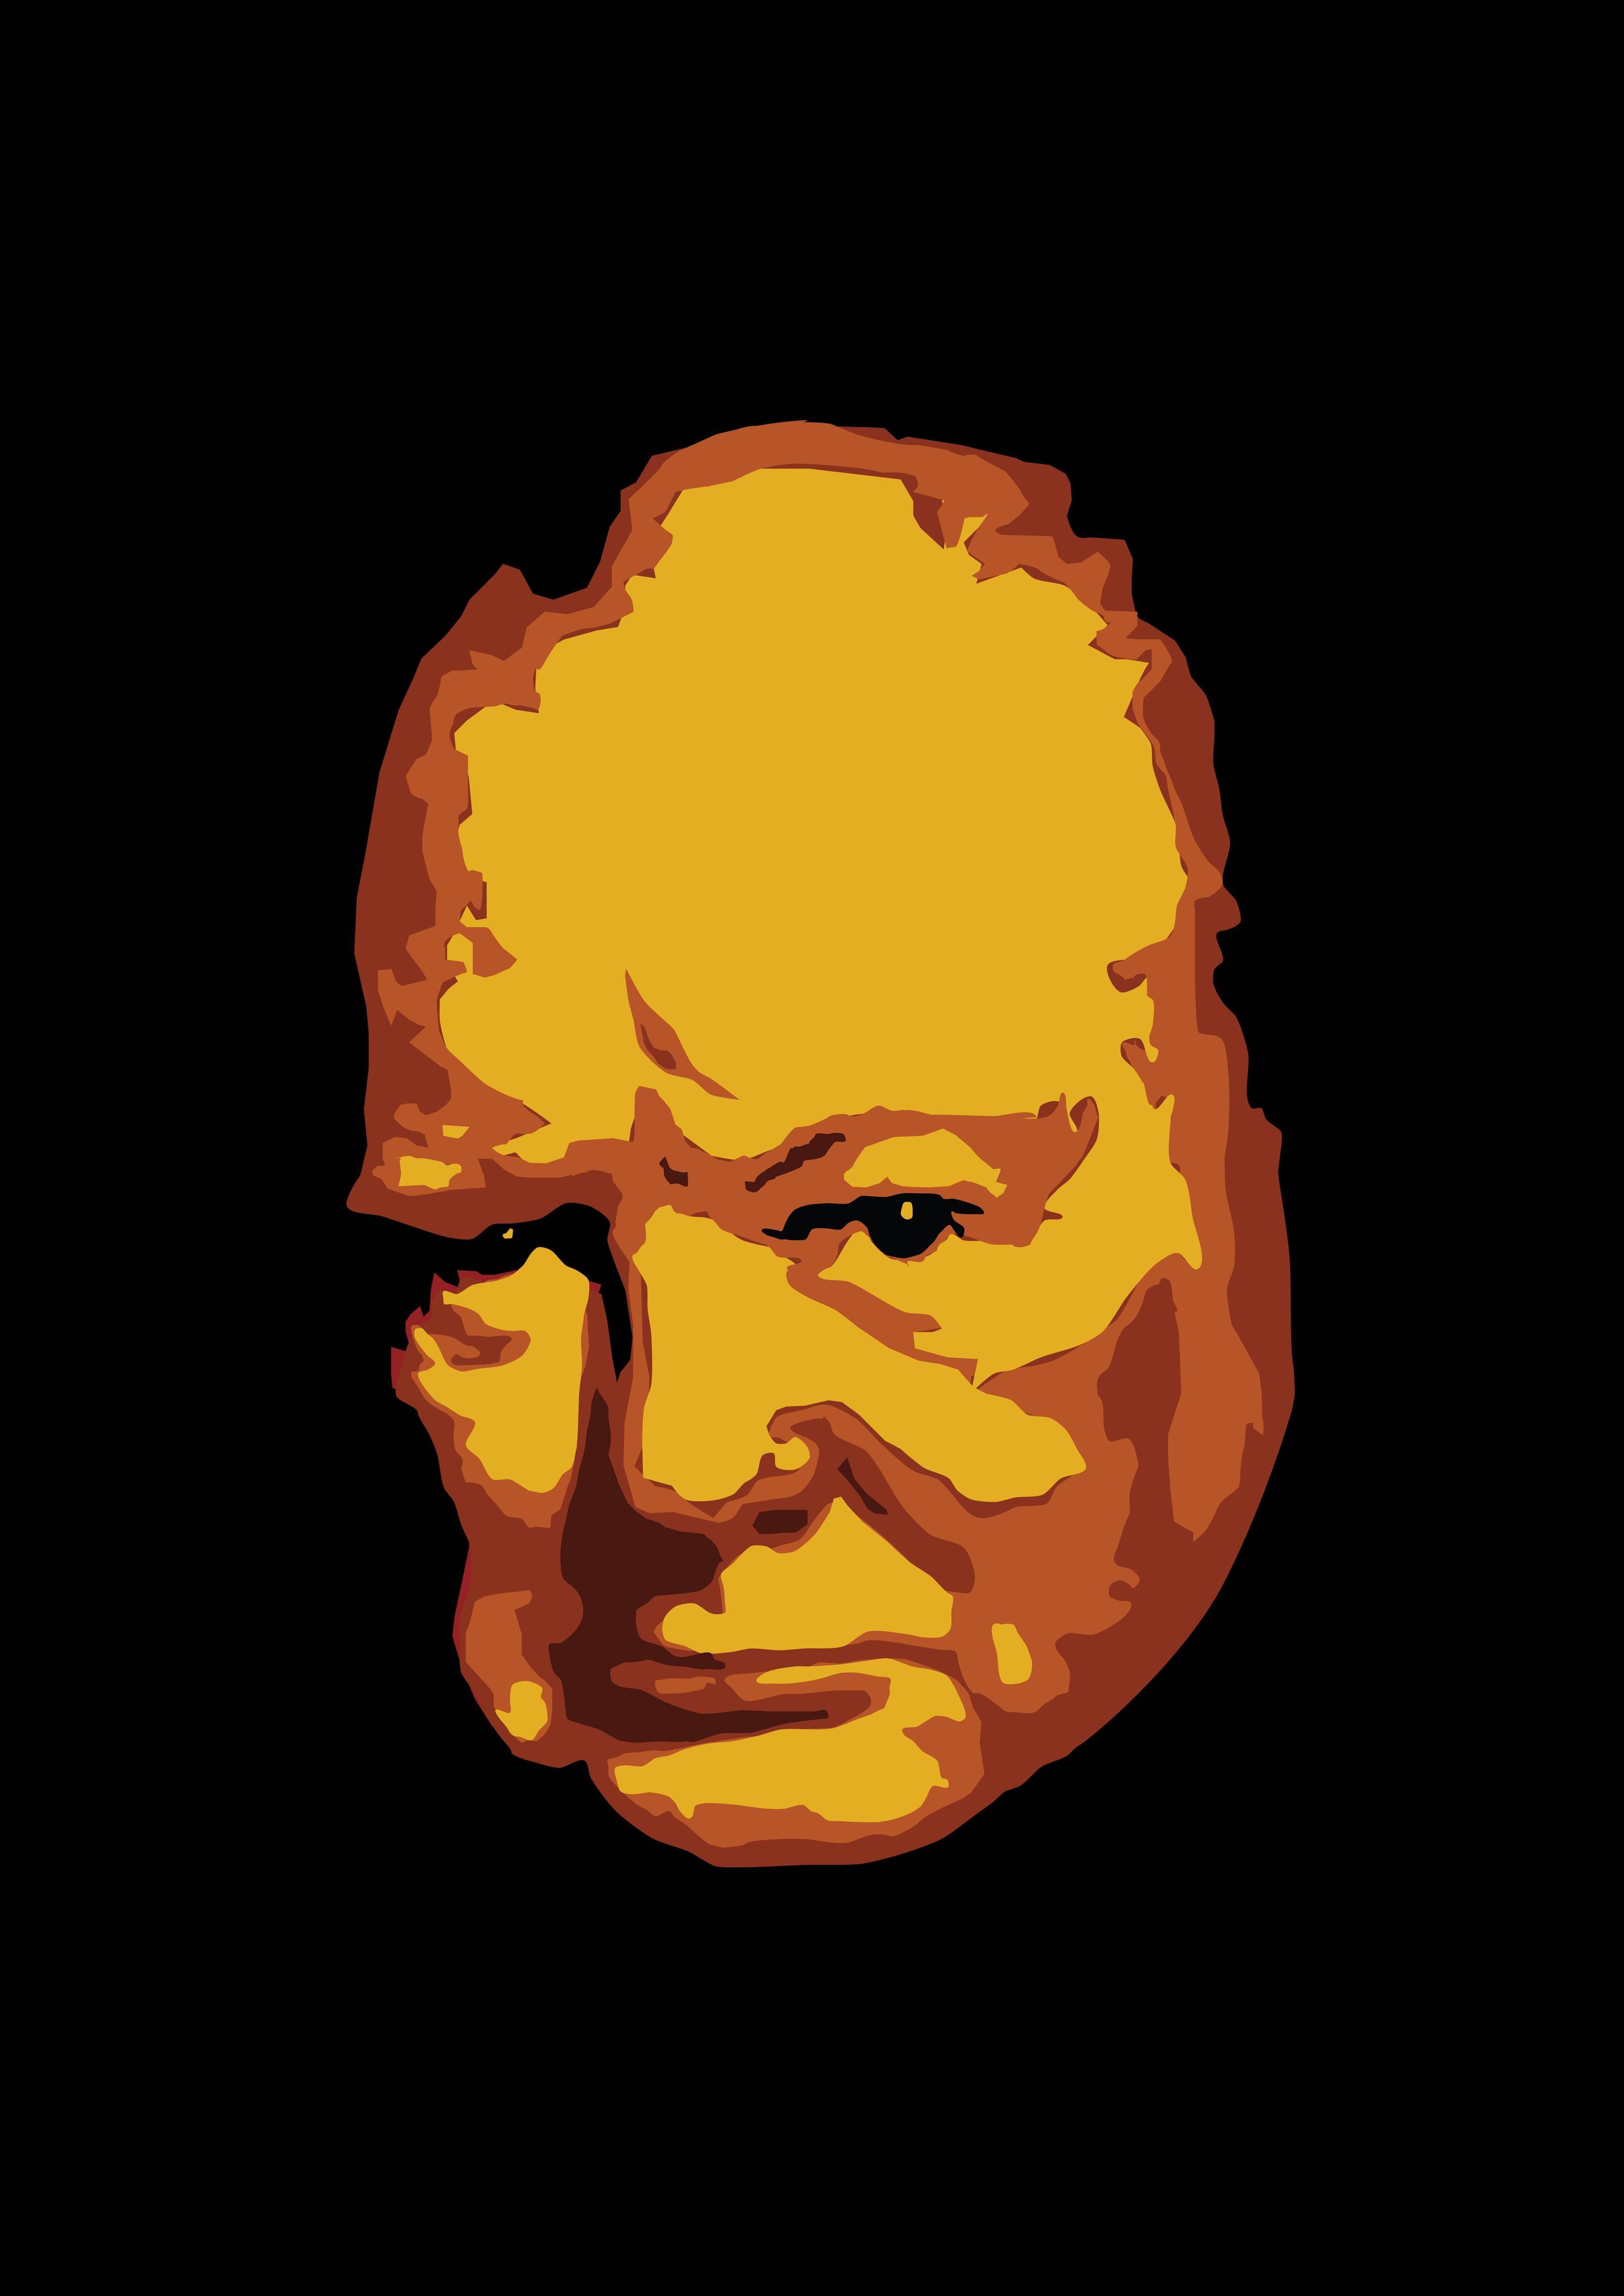 Winston churchill wallpaper - - High Quality and other